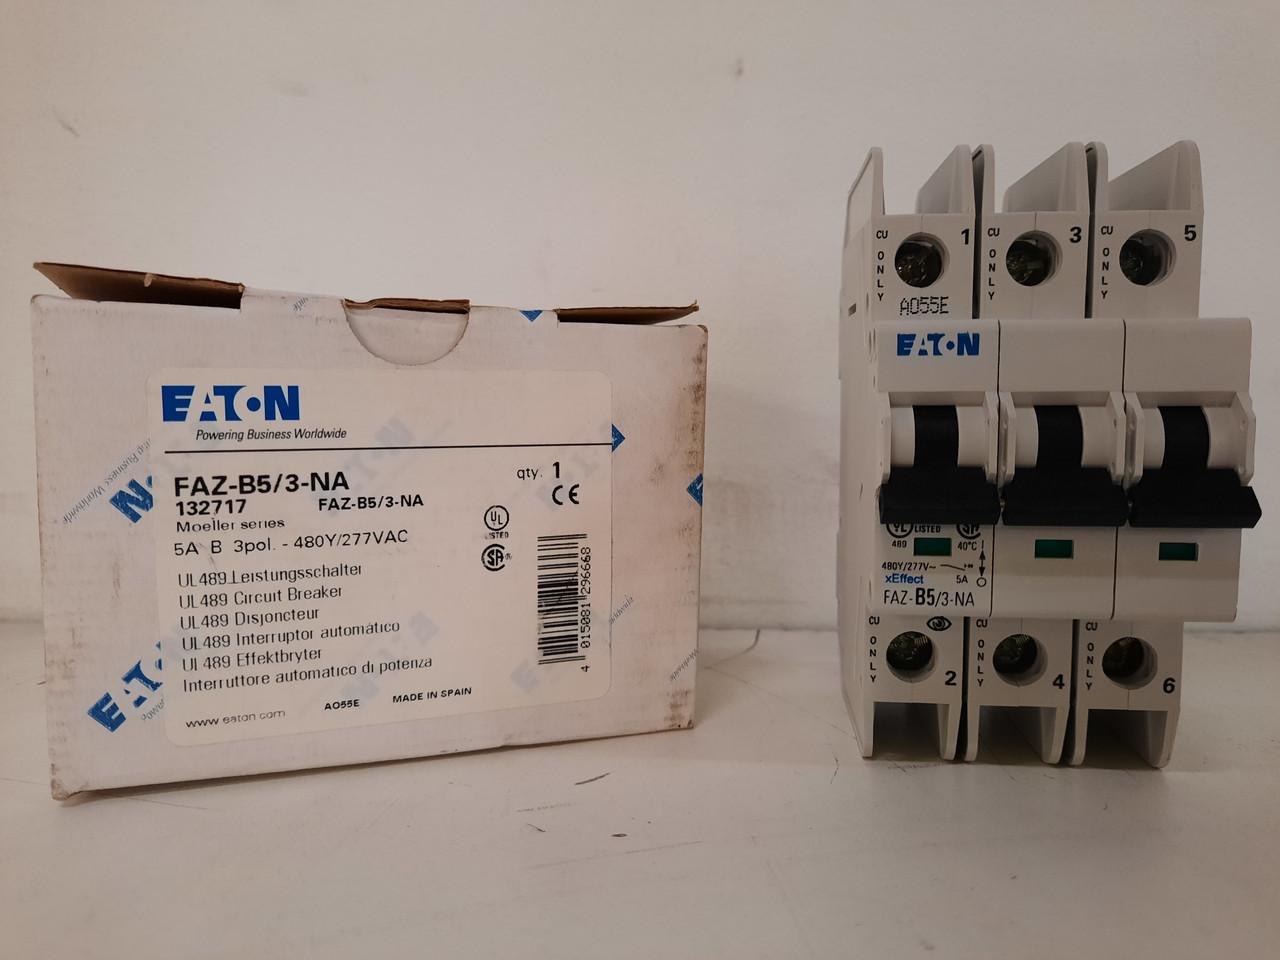 Eaton FAZ-B5/3-NA 277/480 VAC 50/60 Hz, 5 A, 3-Pole, 10/14 kA, 3 to 5 x Rated Current, Screw Terminal, DIN Rail Mount, Standard Packaging, B-Curve, Current Limiting, Thermal Magnetic